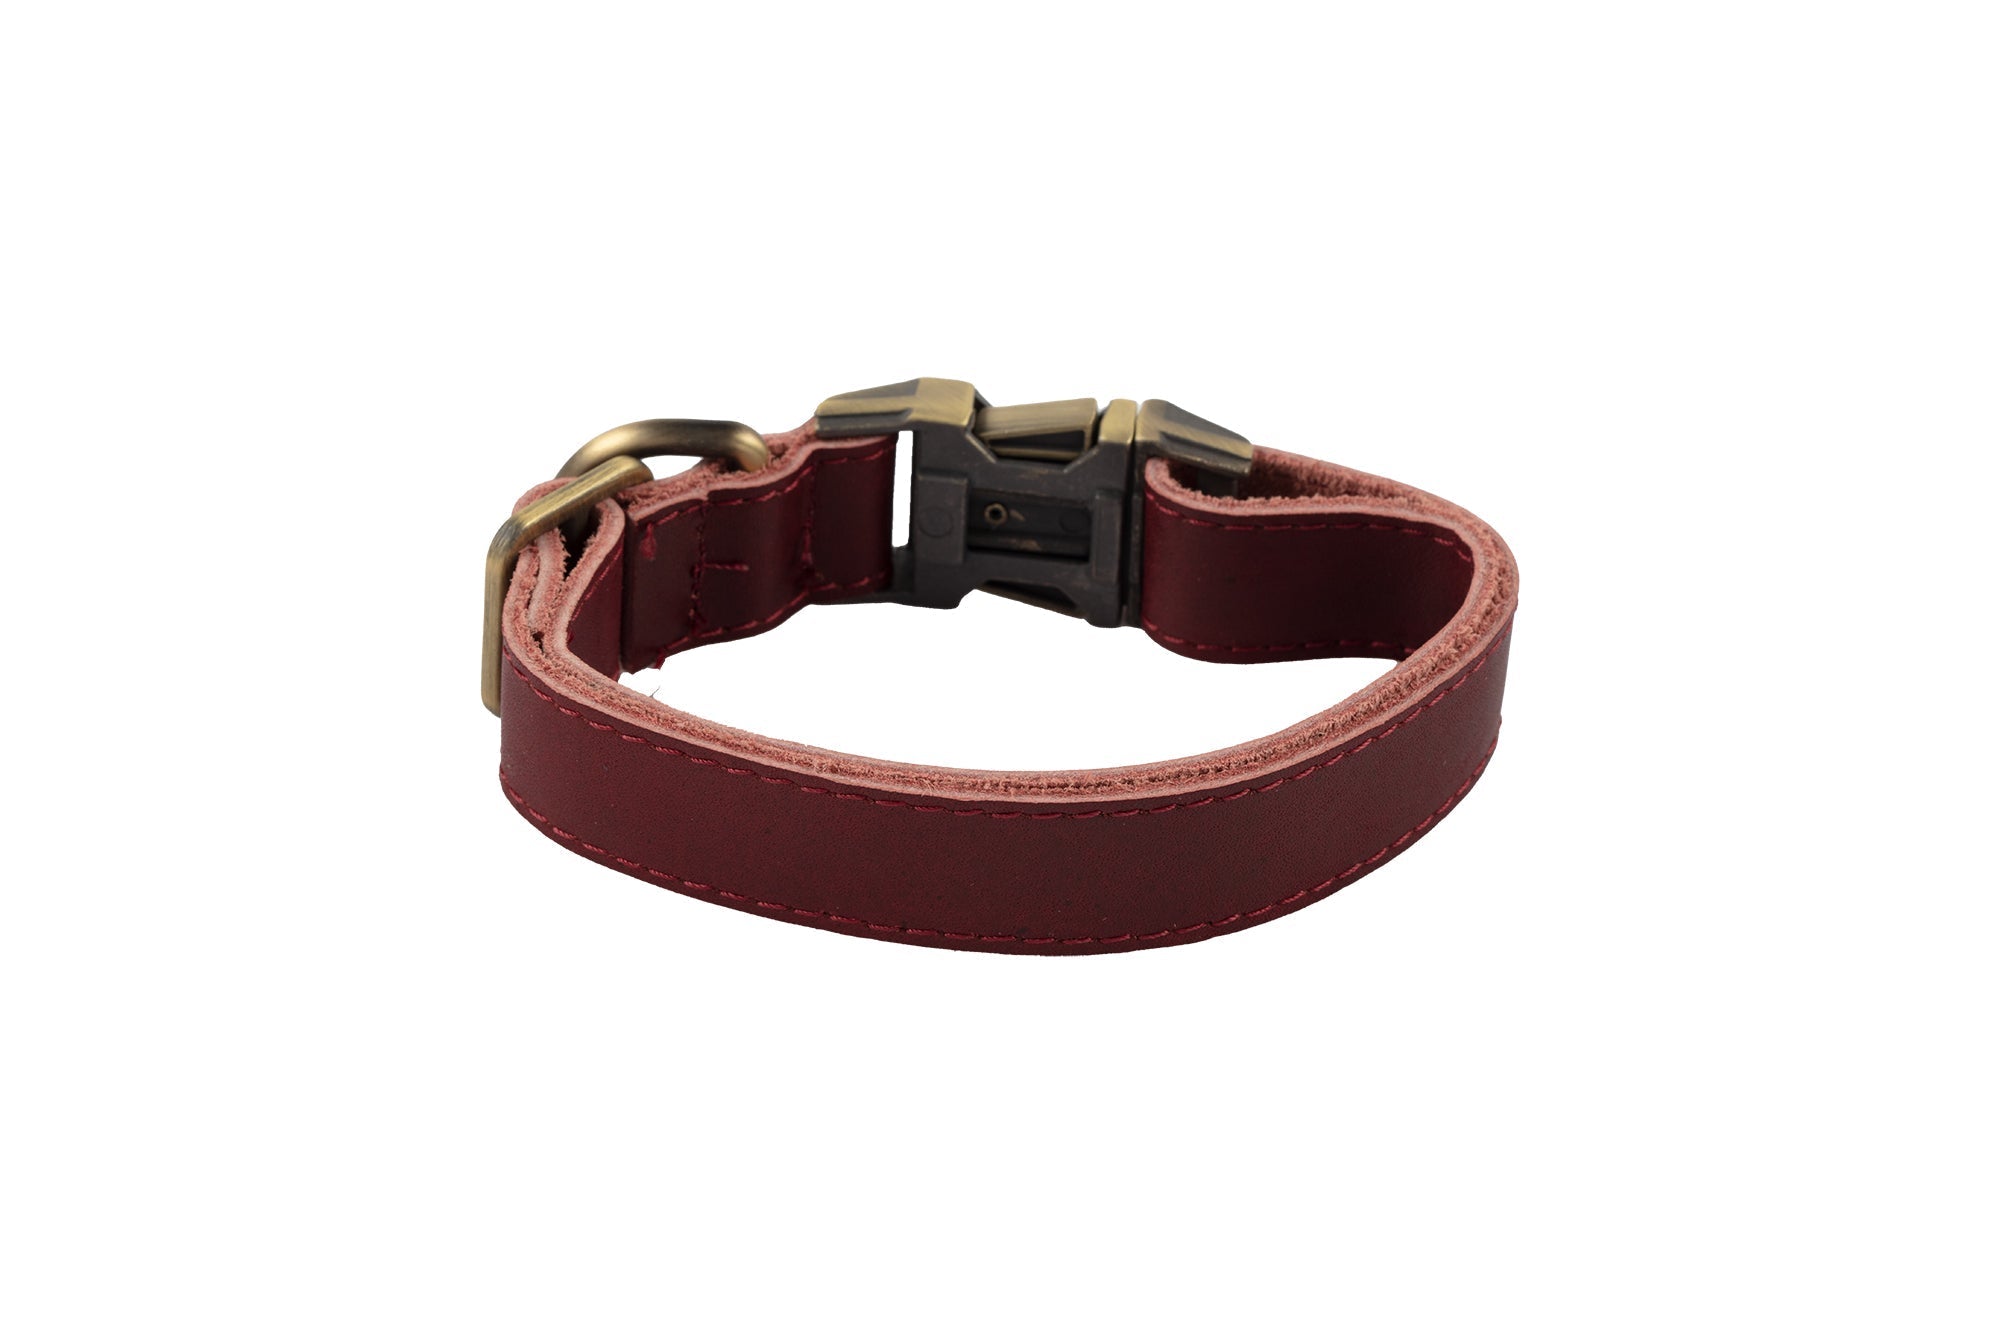 LupinnyLeather Genuine Leather Adjustable Strong Dog Collar for Large Medium Small Dogs 66